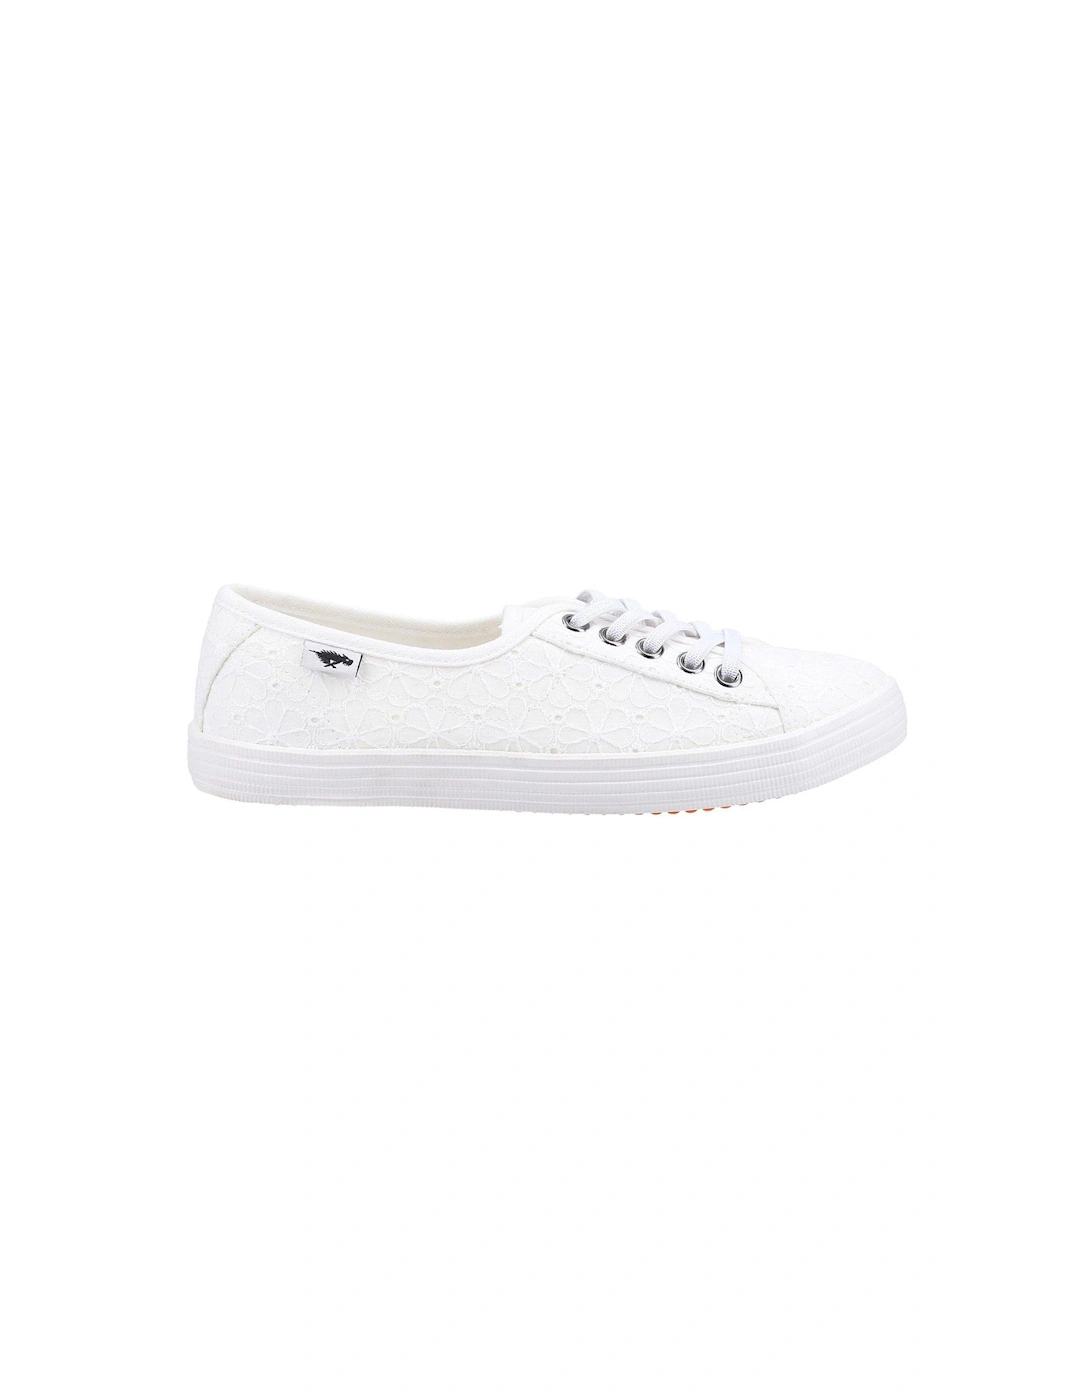 Chow Chow Summer Jersey Plimsolls - White, 2 of 1